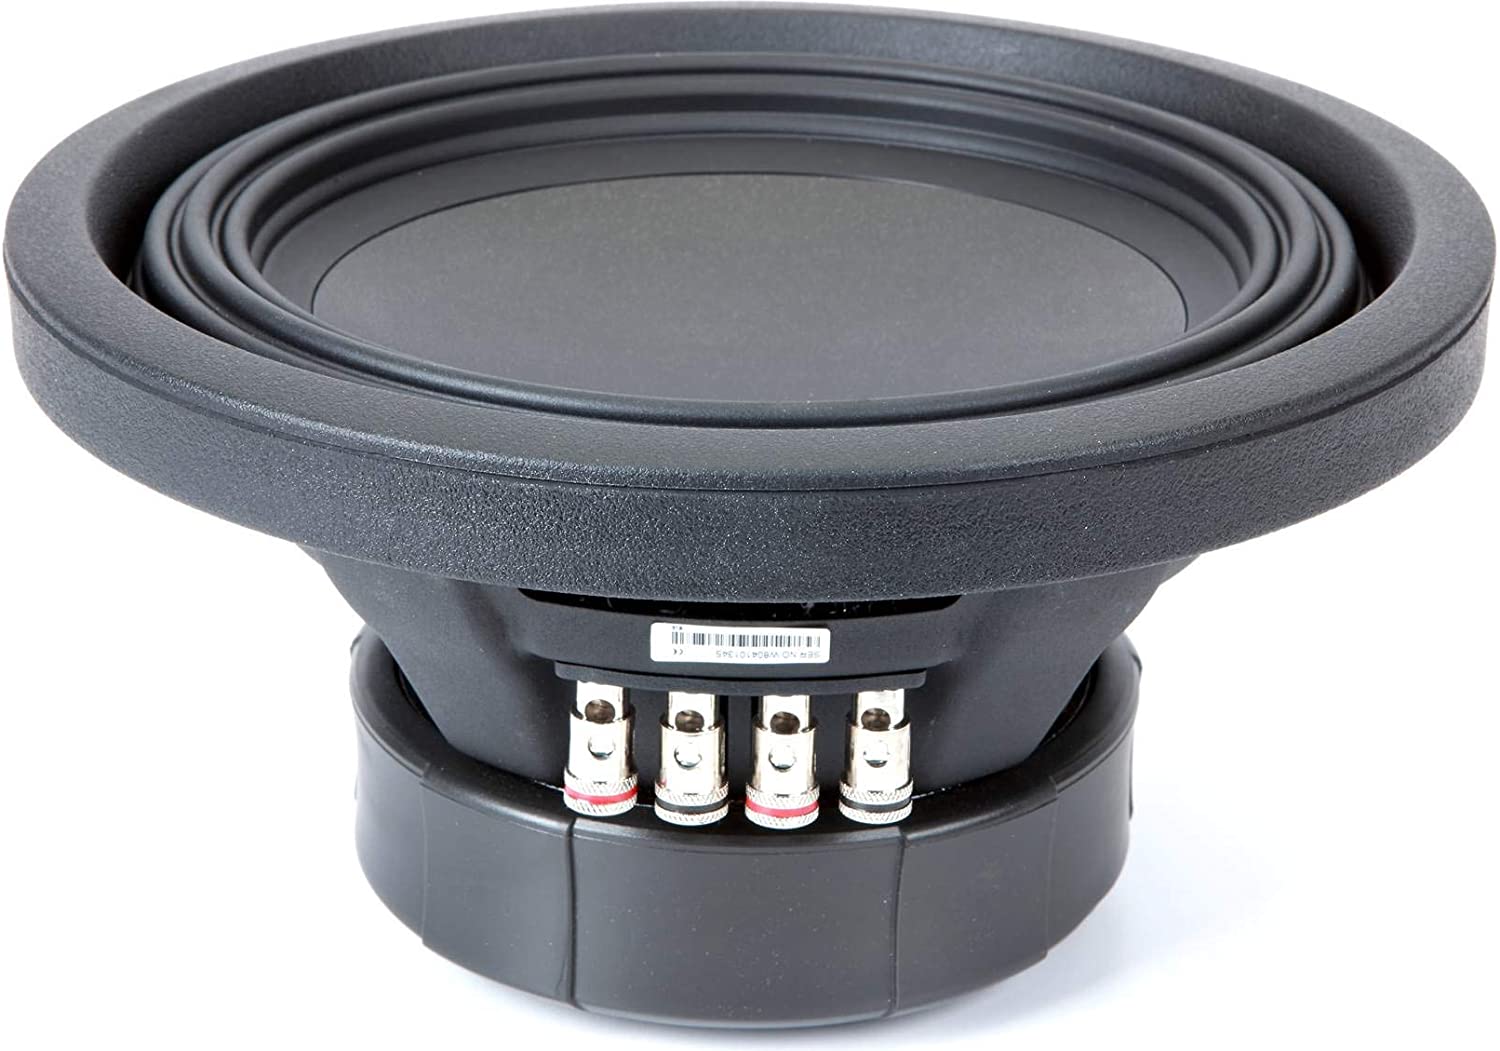 Alpine S-W12D4 12"  Type S Car Audio Subwoofer with Rearfire Sealed Universal Custom Sub Box Enclosure Car Stereo